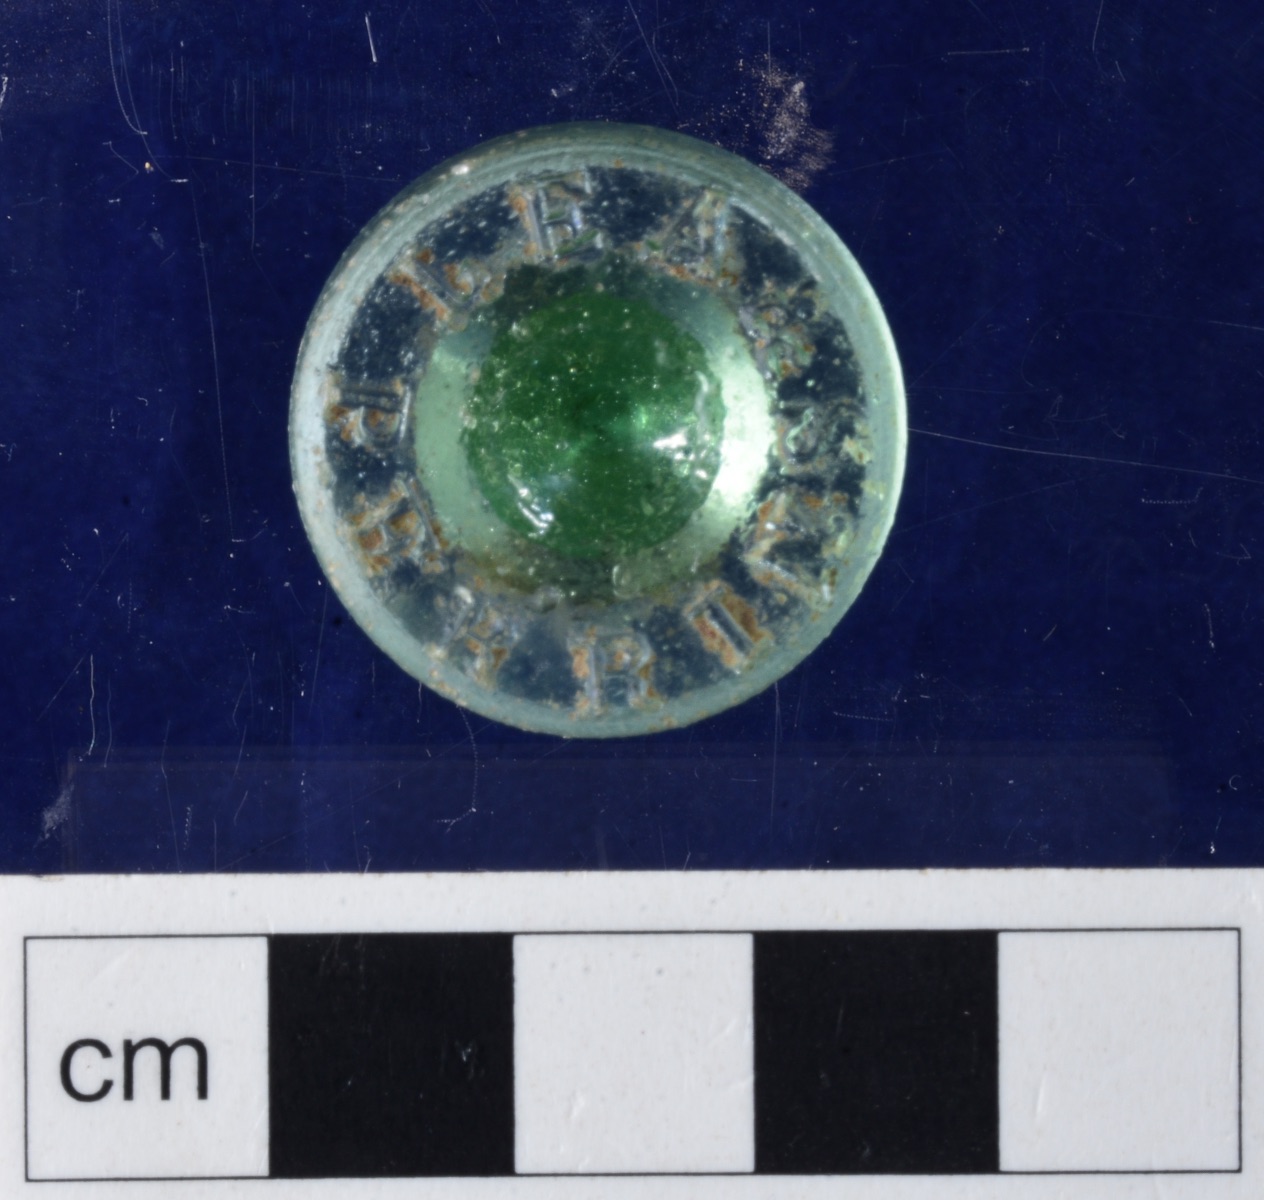 IMAGE 1 – front view of lea & perrins’ glass bottle stopper that was located on the surface curtis park, armidale, nsw, march 2020 (m. zarb).